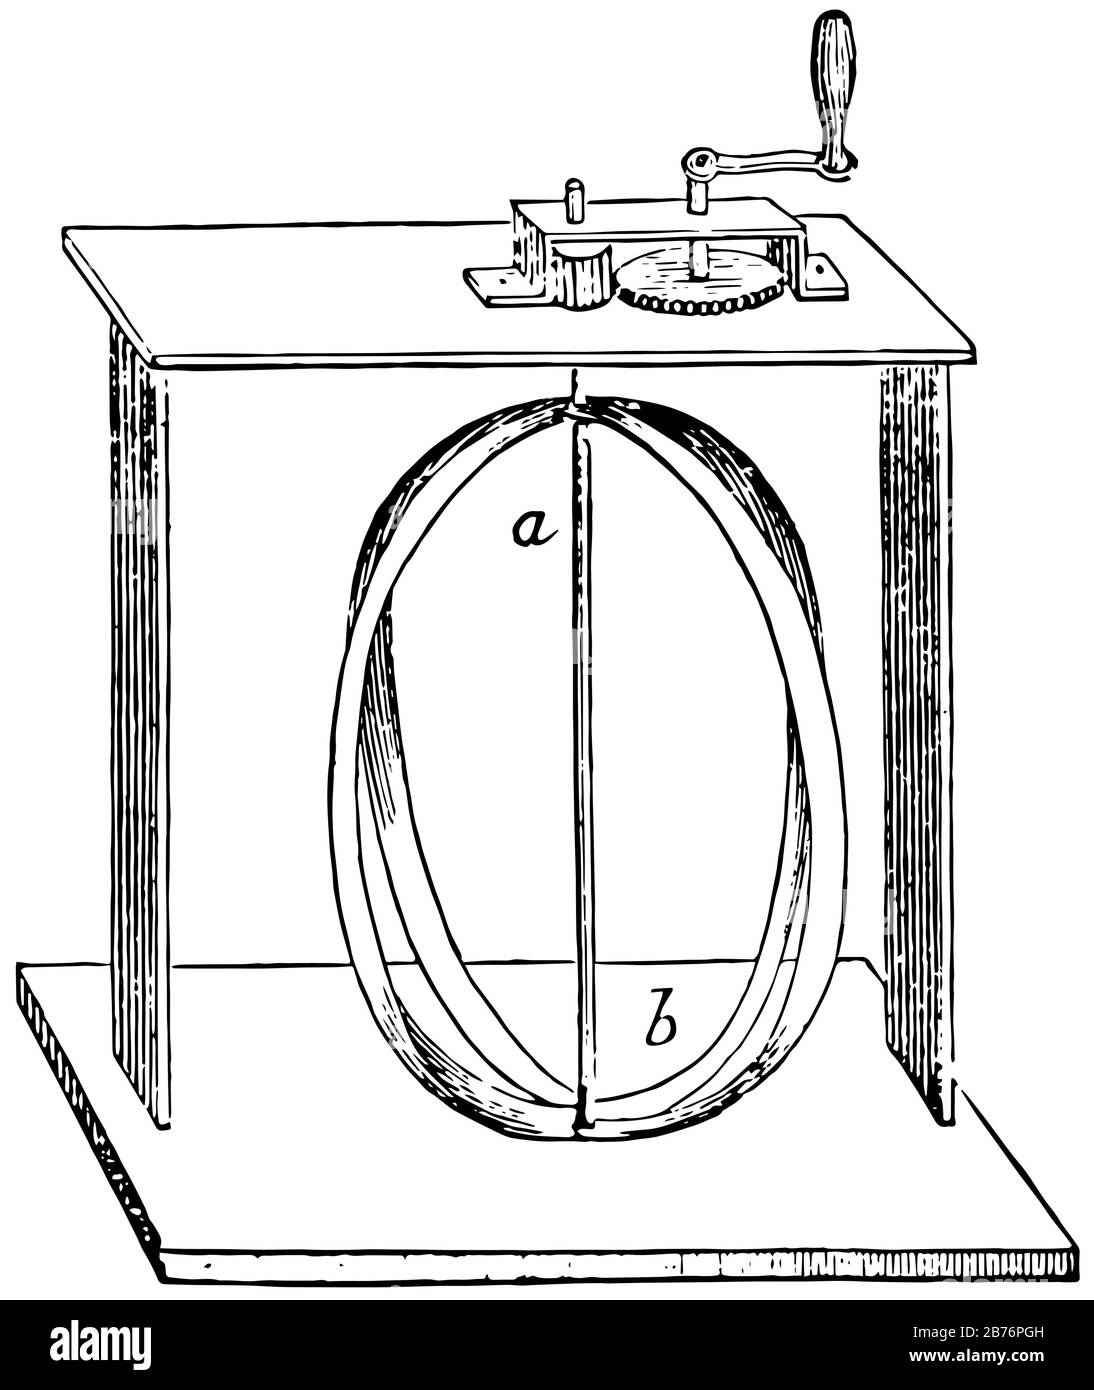 Pole Depression is instrument to create centrifugal force to expand or swell at equator by turning the hoops rapidly, vintage line drawing or engravin Stock Vector